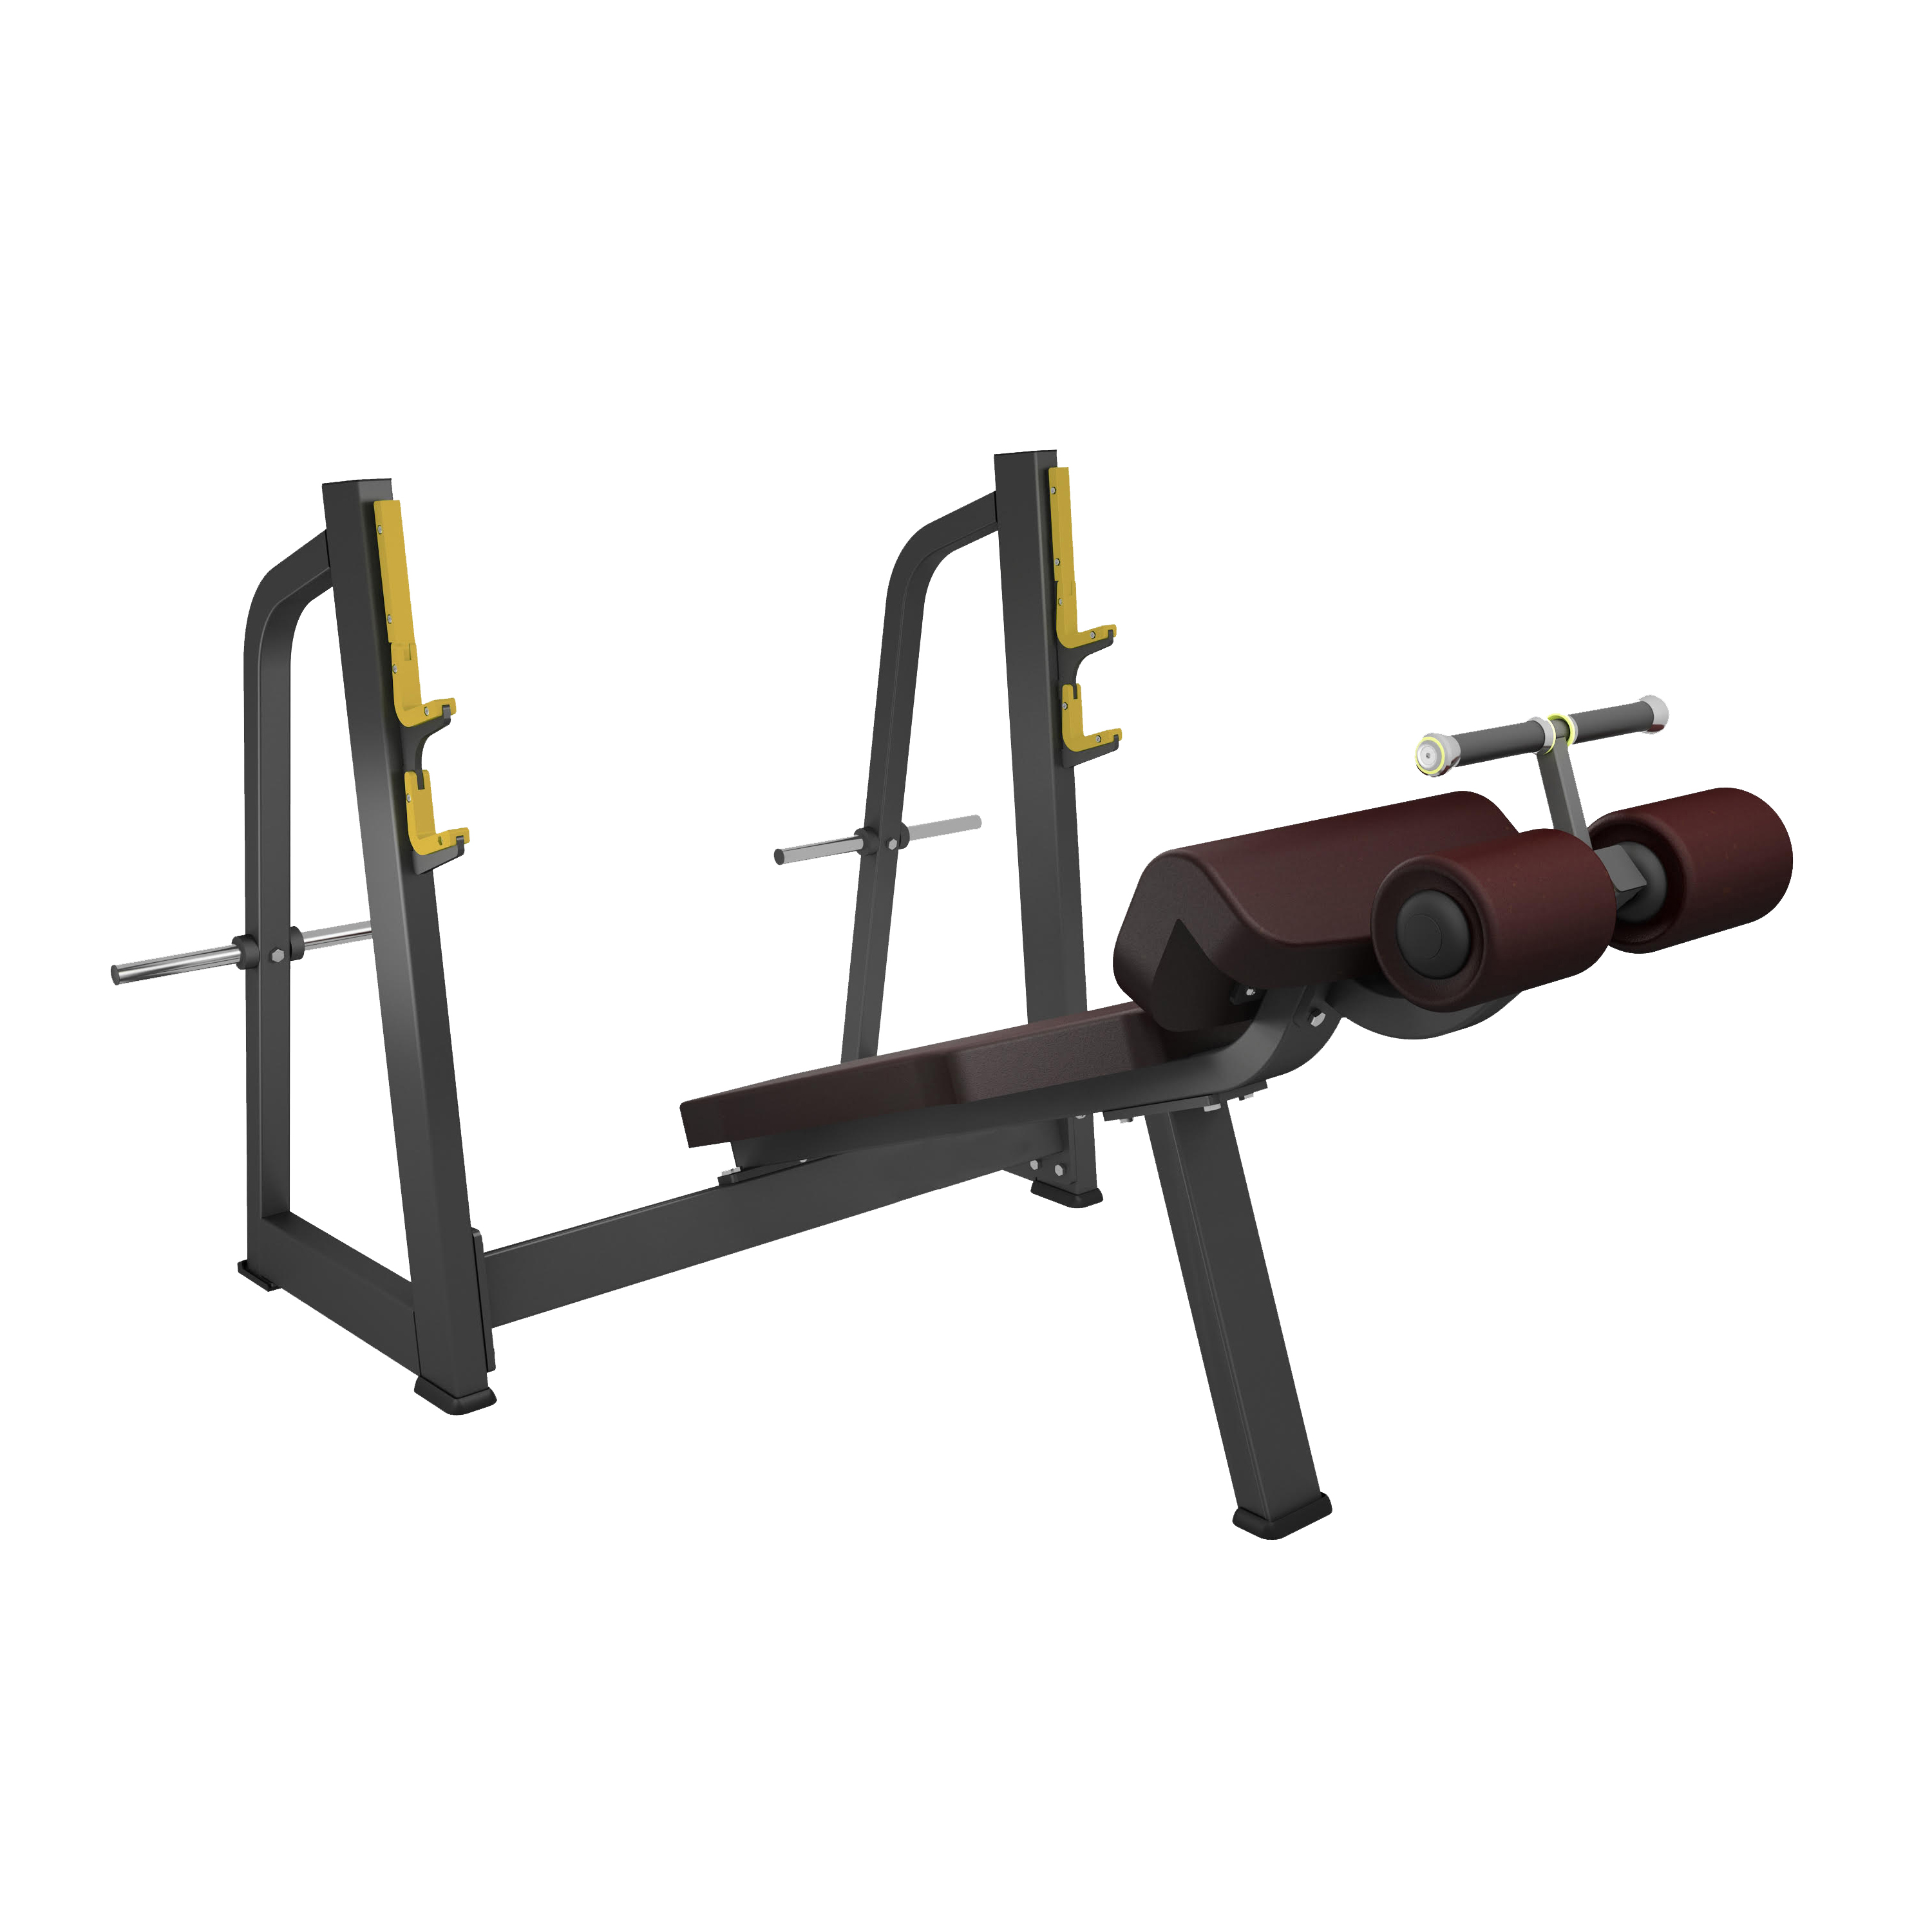 SRTB-42 OLYMPIC INCLINE BENCH – Harco India